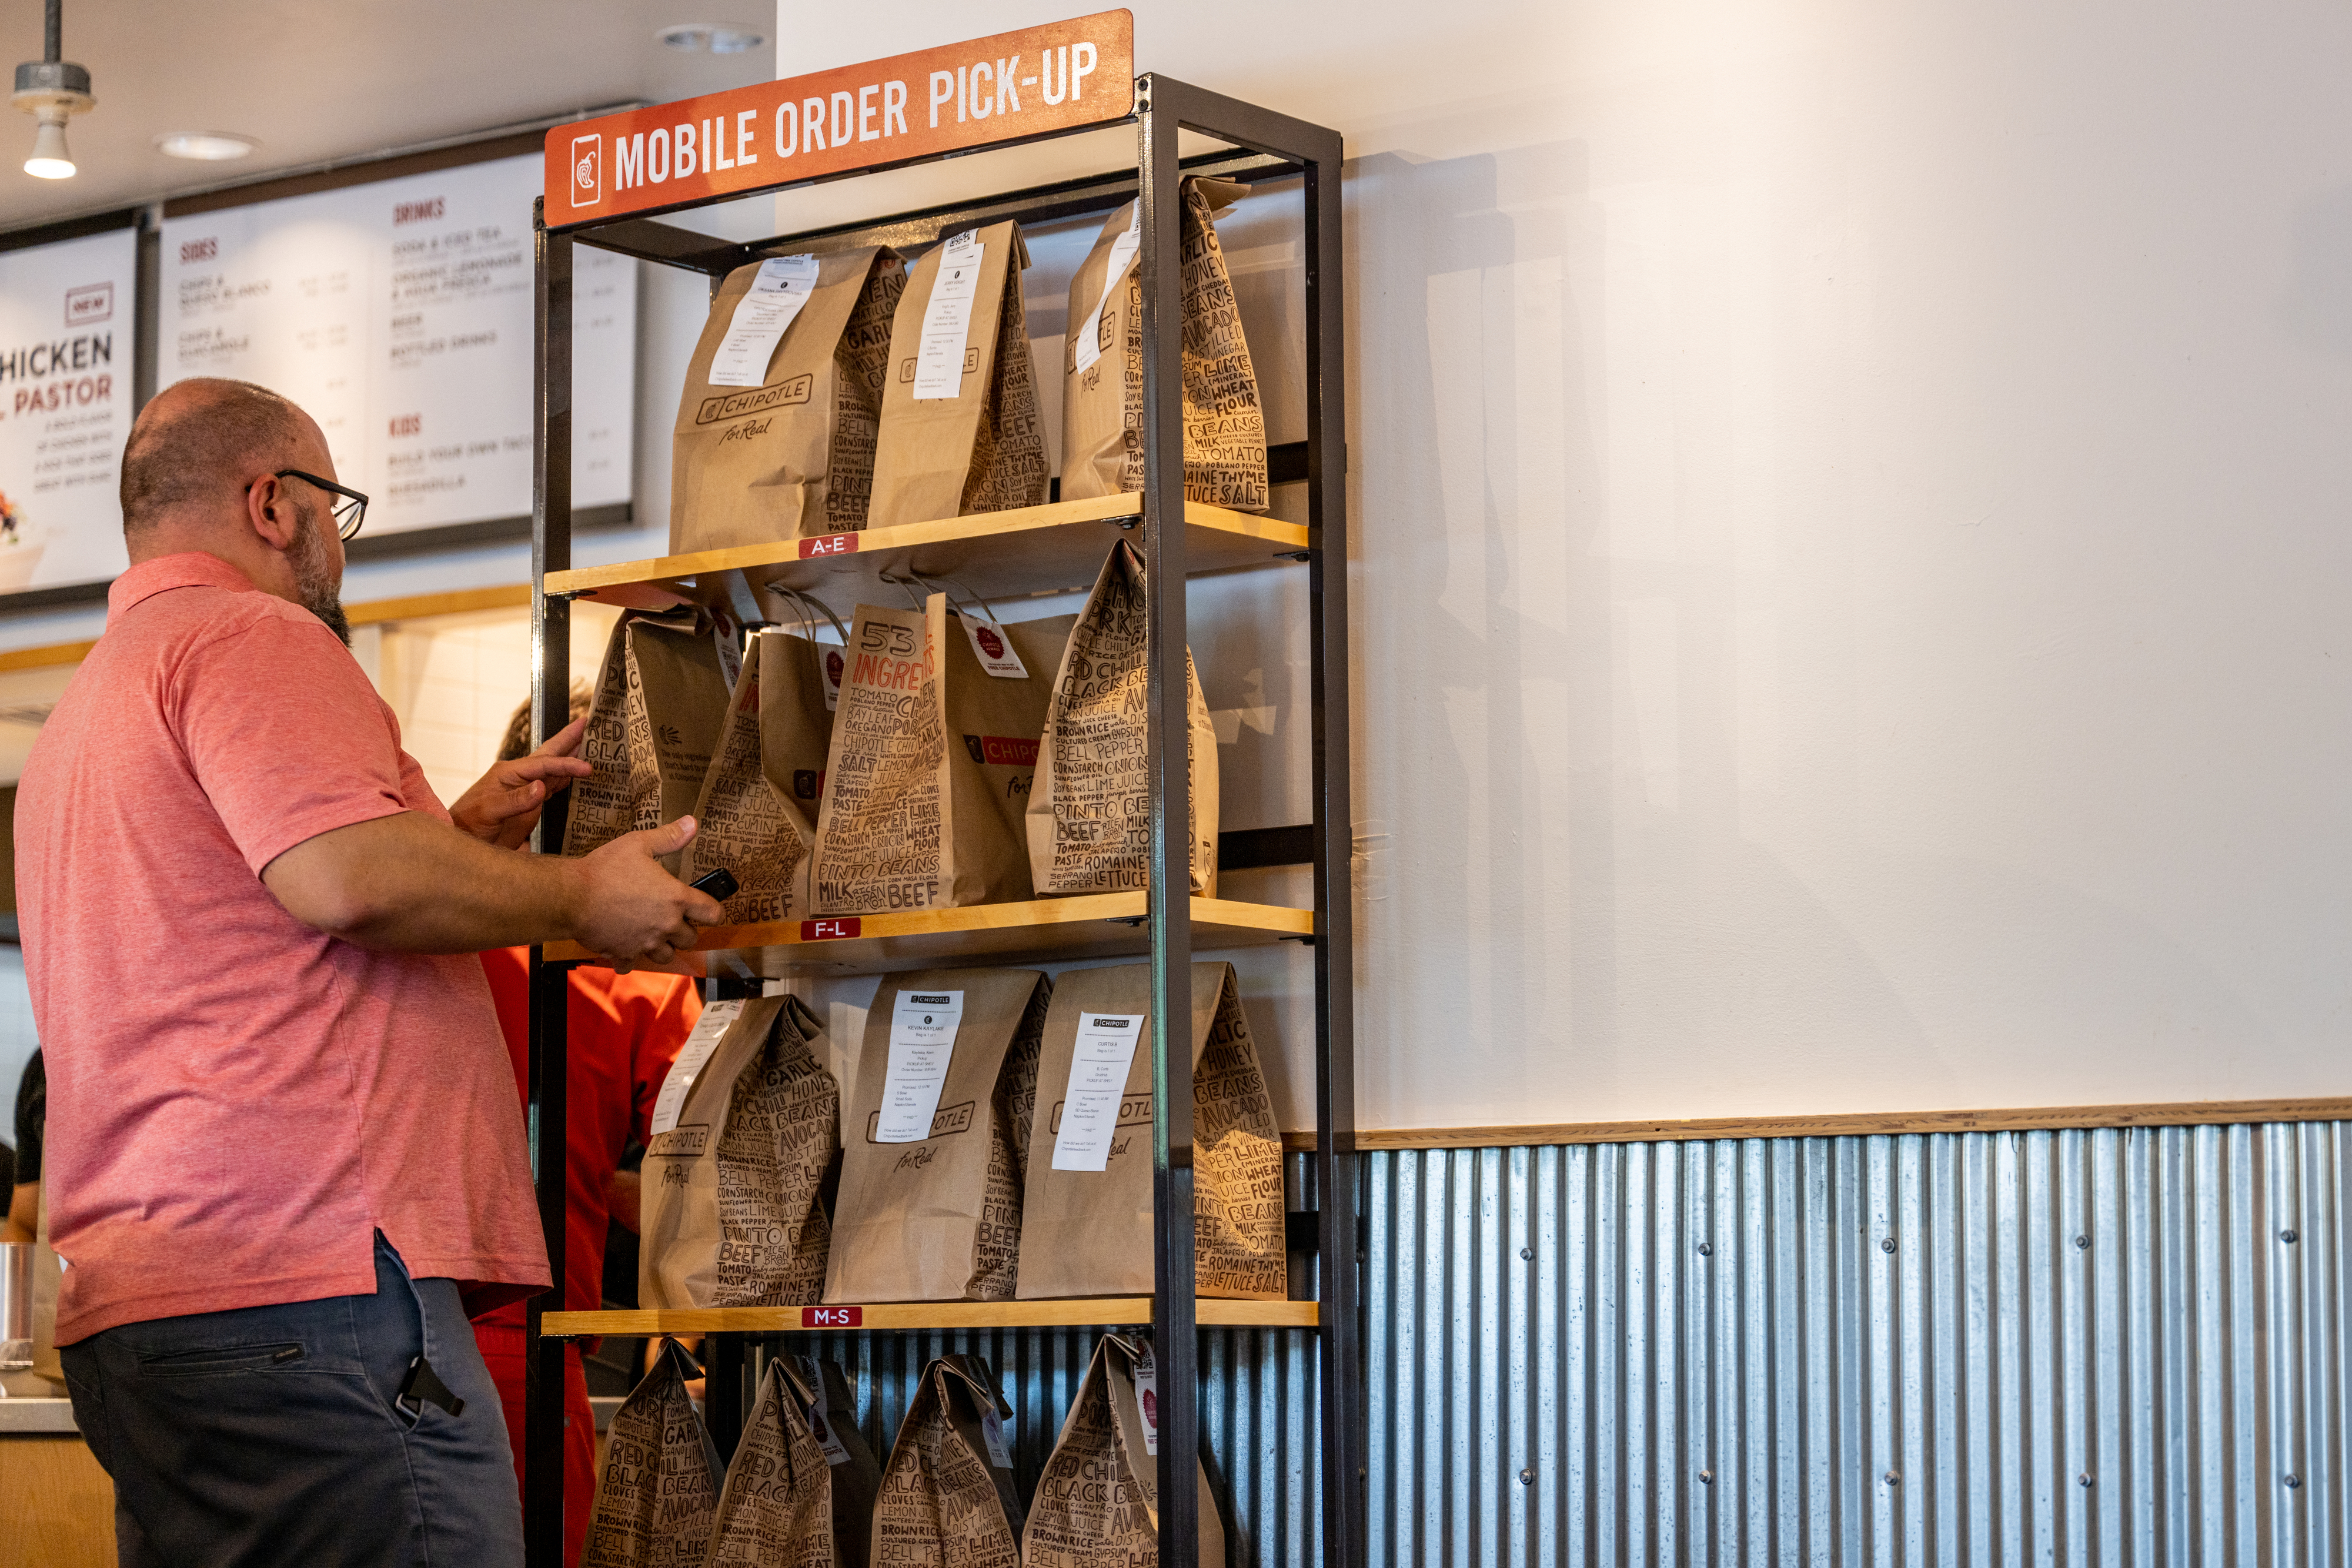 person picking up mobile order at a Chipotle location